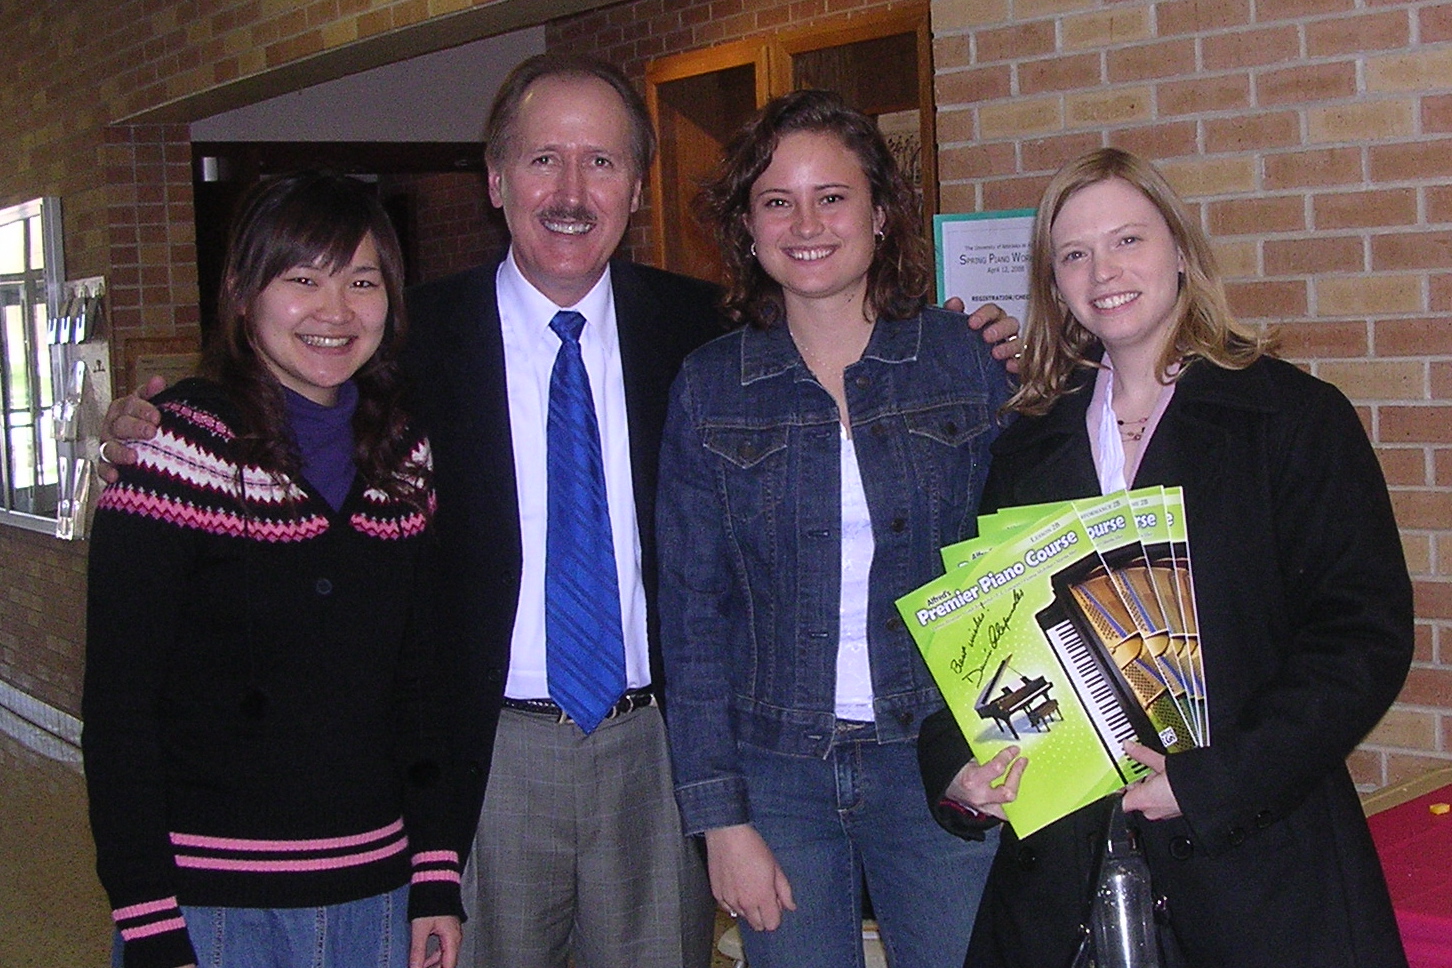 With another door prize winner, and Hikari Maekawa who played the Grieg concerto for me.